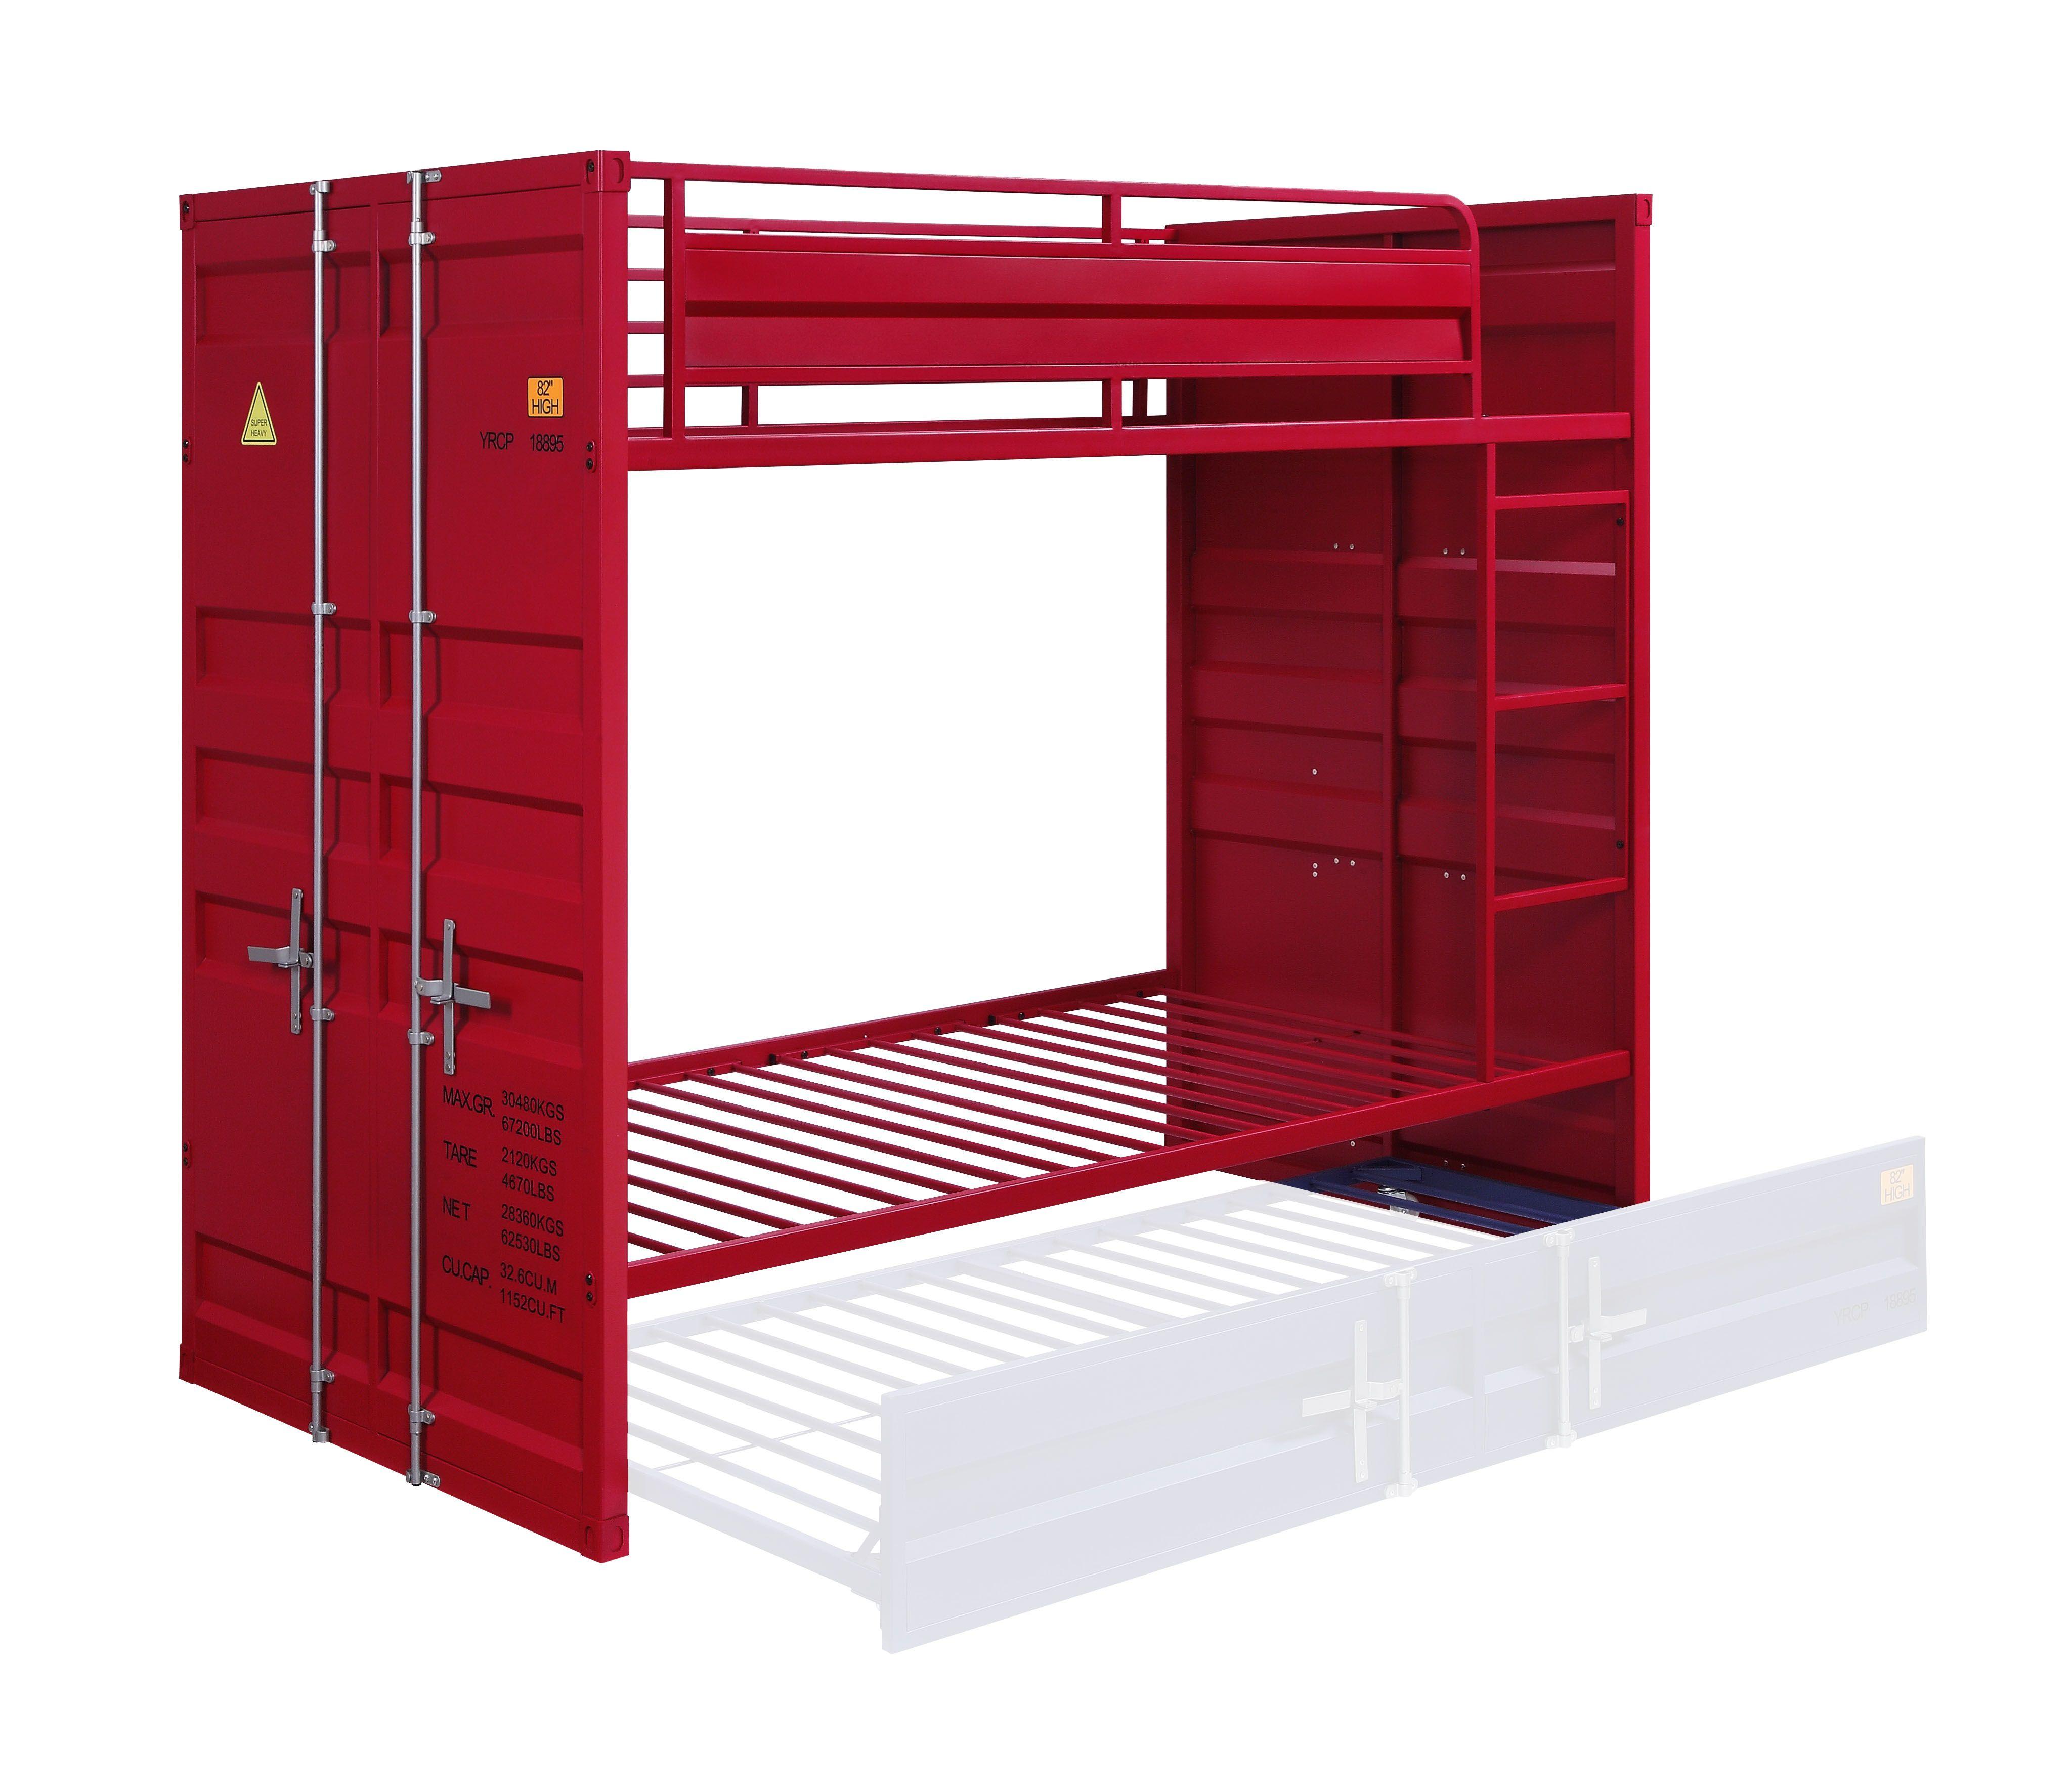 

    
Contemporary Red Twin Bunk Bed + Trundle by Acme Cargo 37910-2pcs
